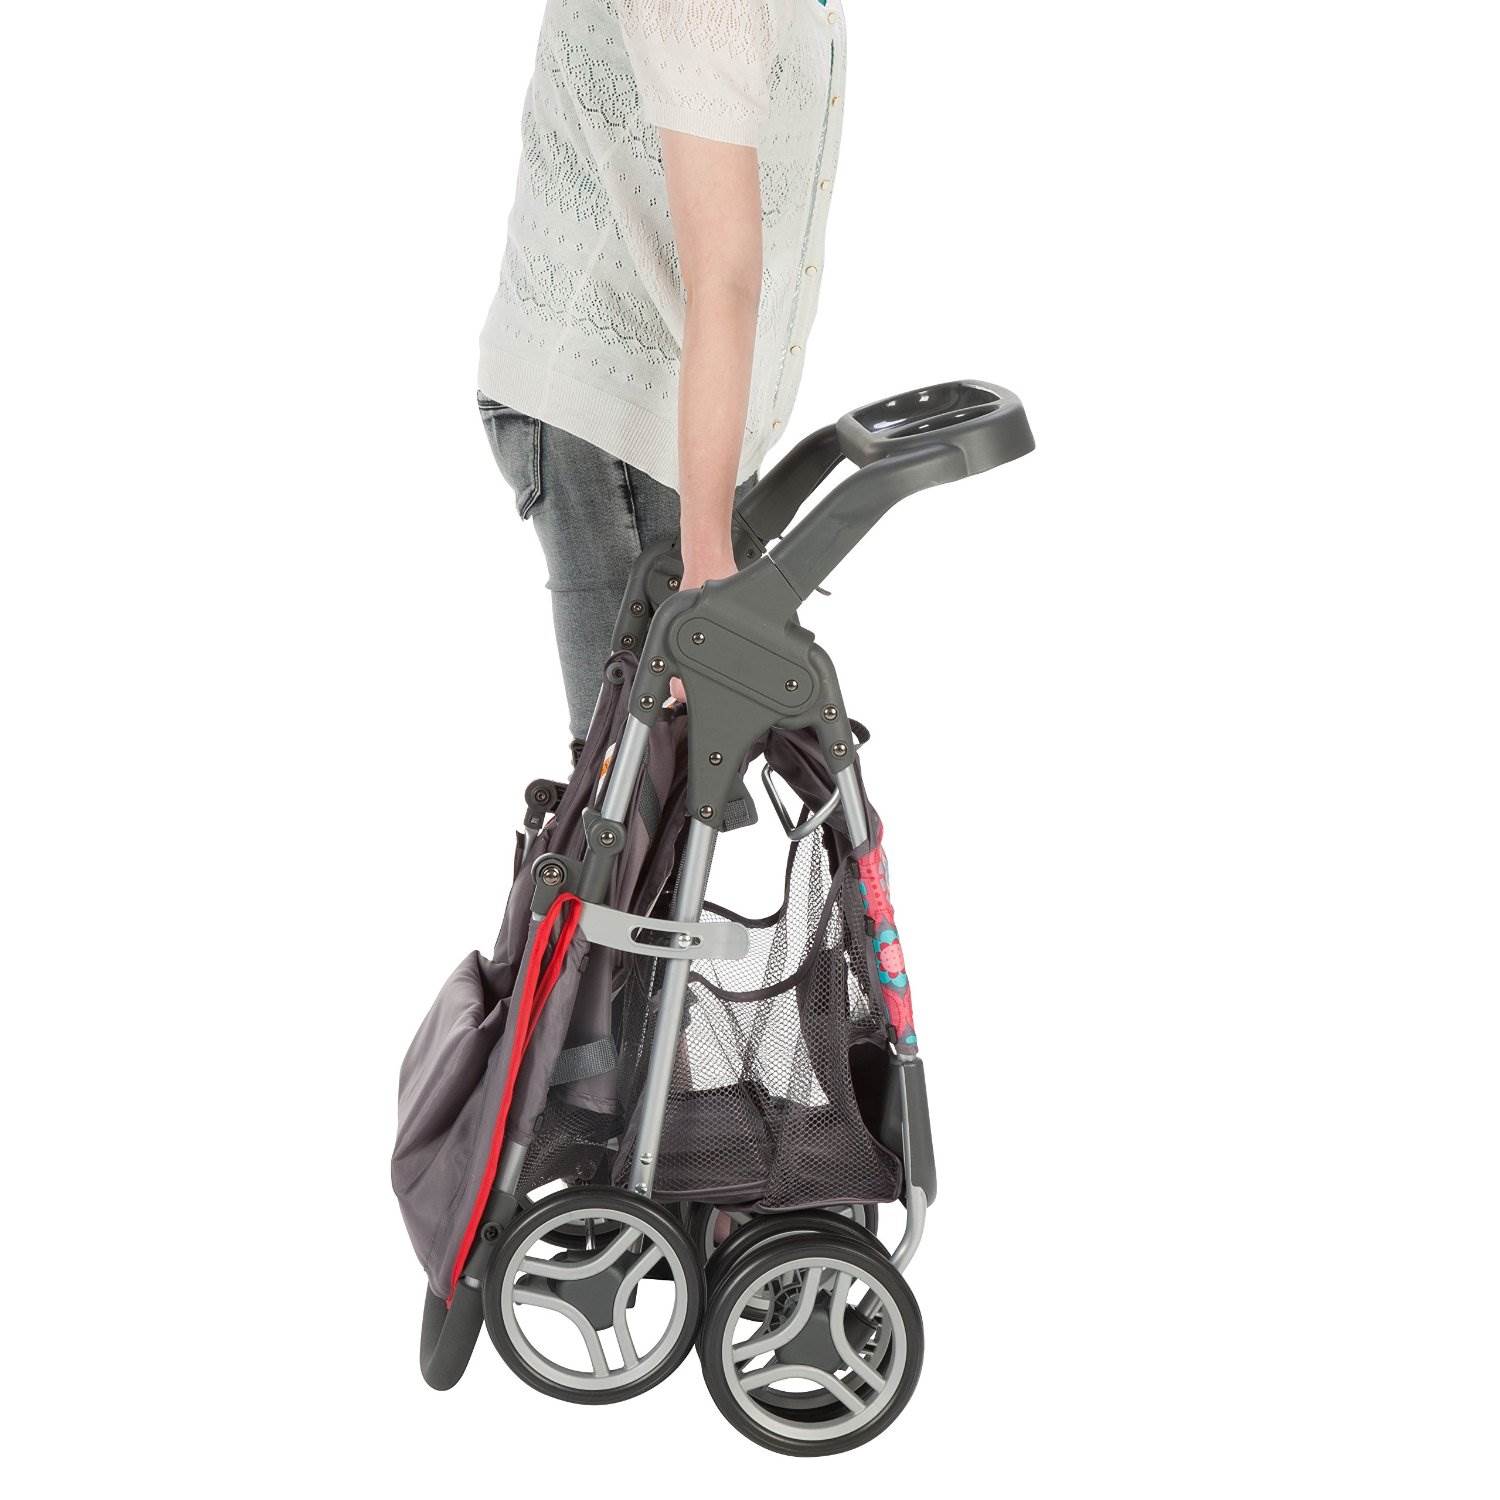 Cosco Lift &amp; Stroll Posey Pop Convenience Standard Stroller - image 5 of 8